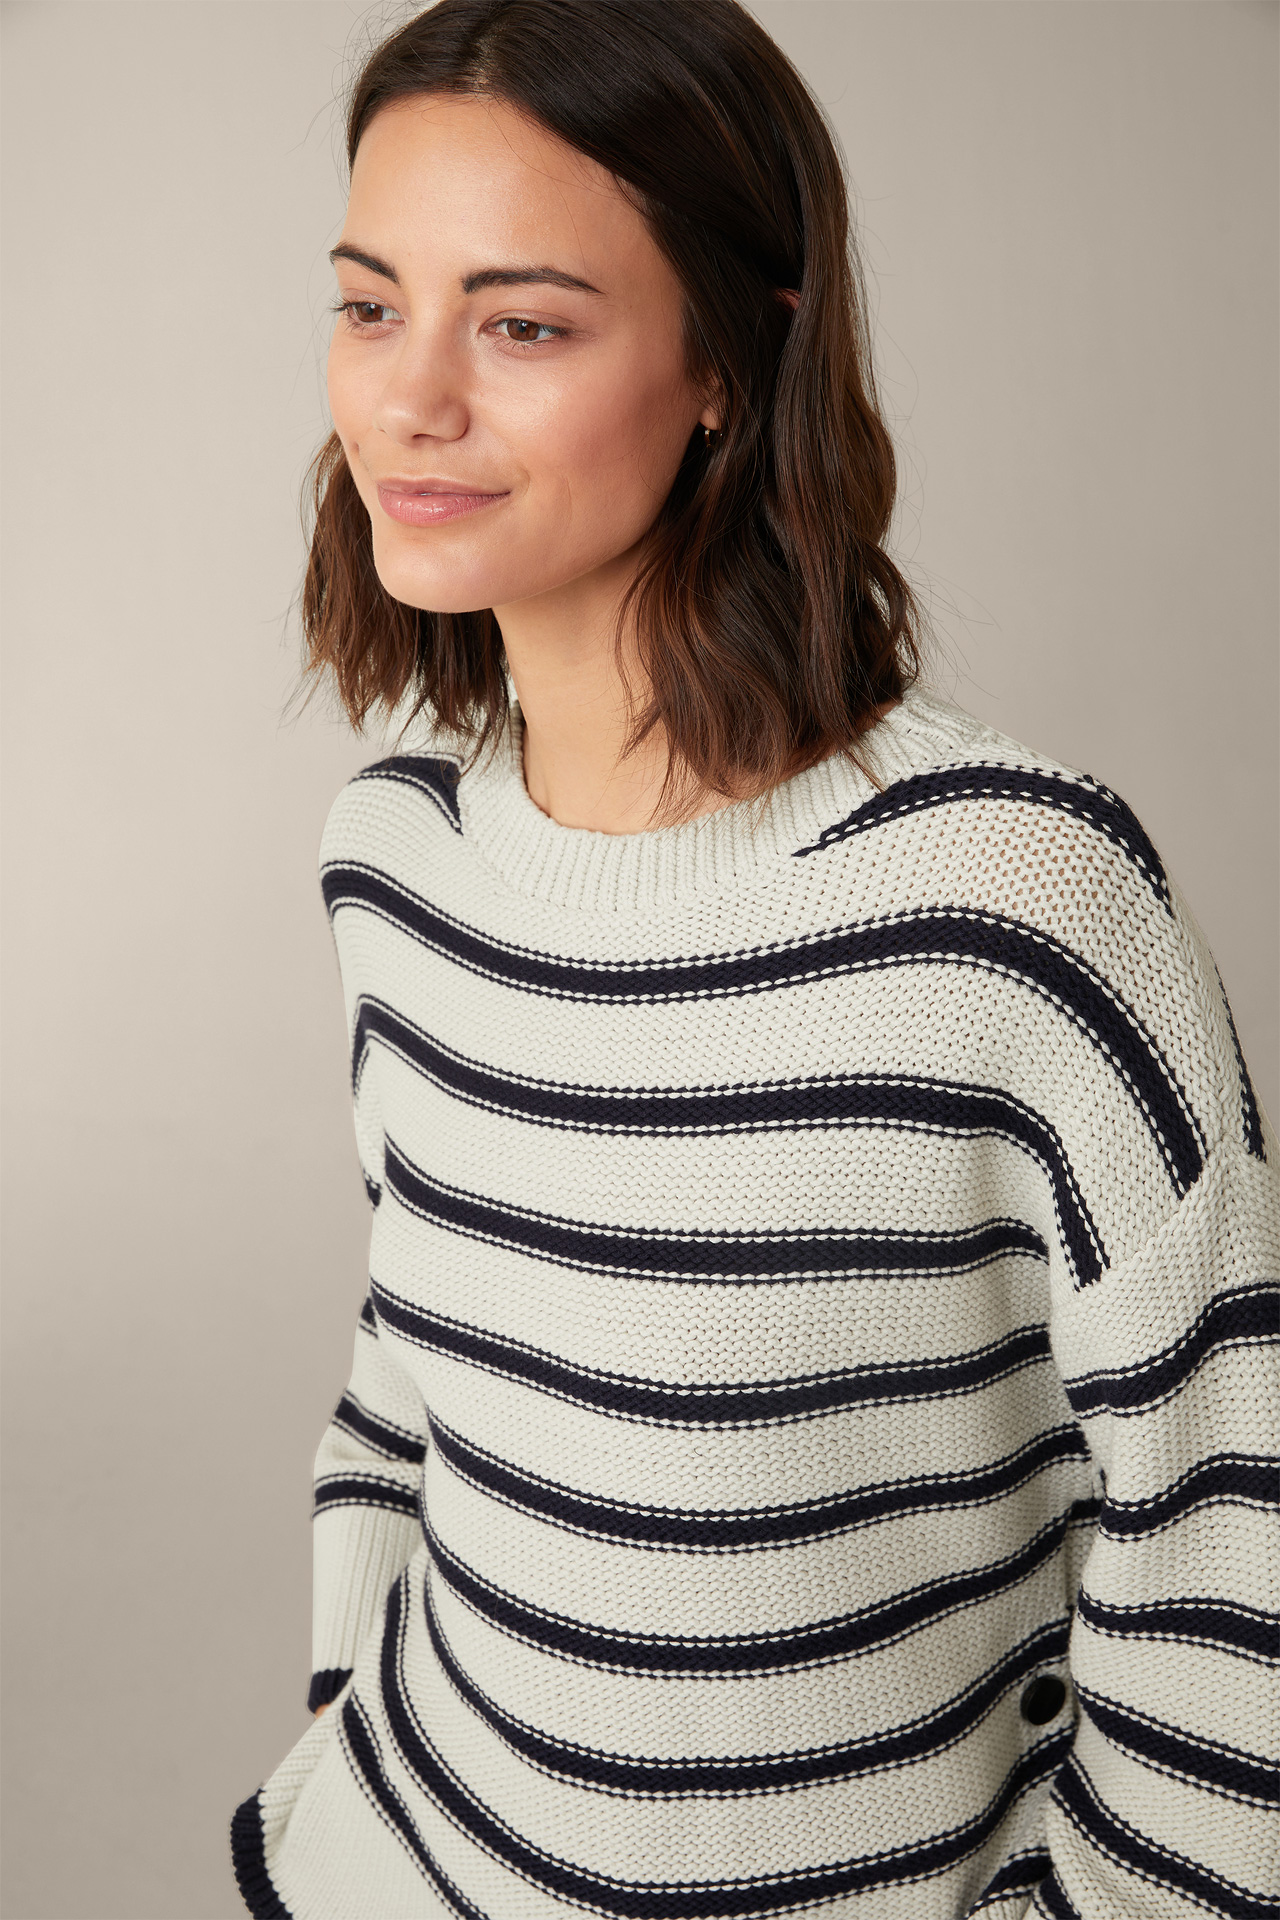 Cotton Blend Knitted Pullover in Navy and Light Beige Striped